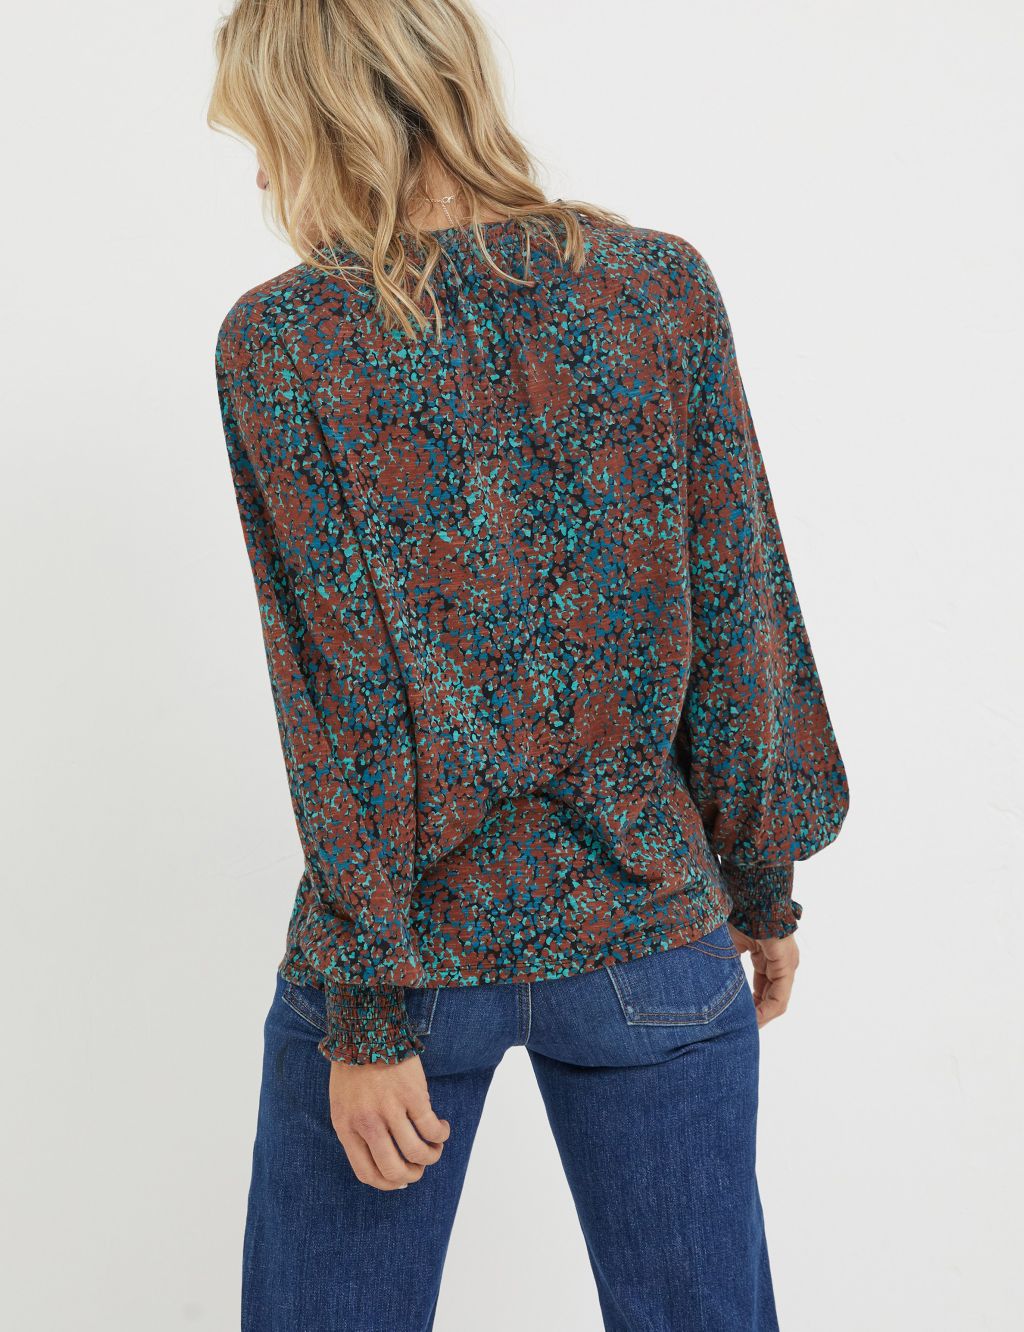 Cotton Modal Blend Printed Textured Top image 3